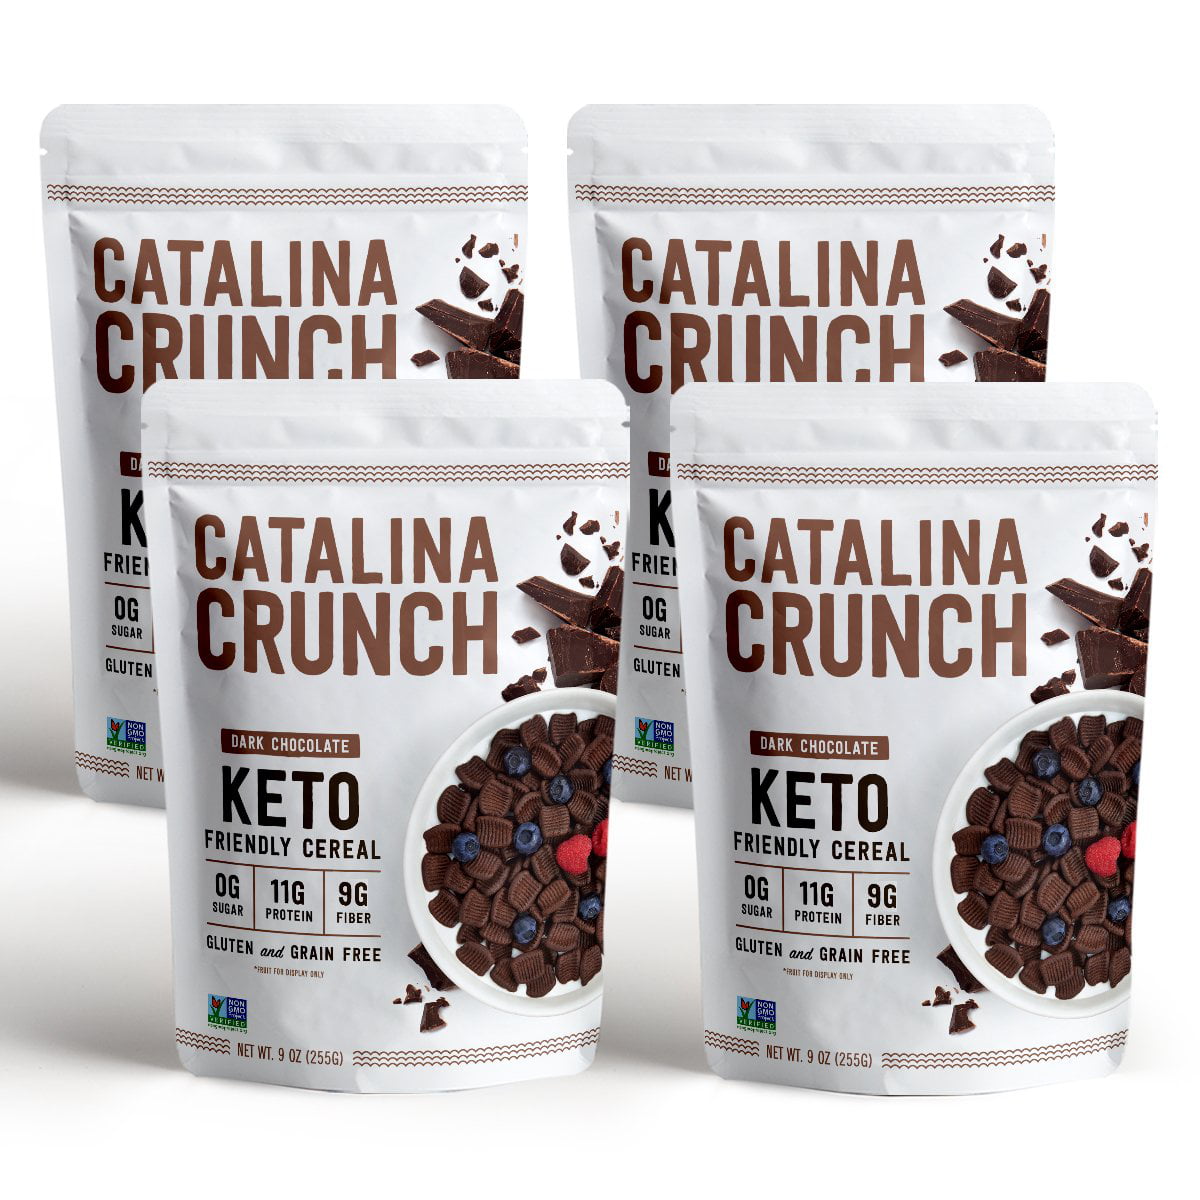 Catalina Crunch Dark Chocolate Keto Cereal (4 Pack) 9oz bags | Low Carb